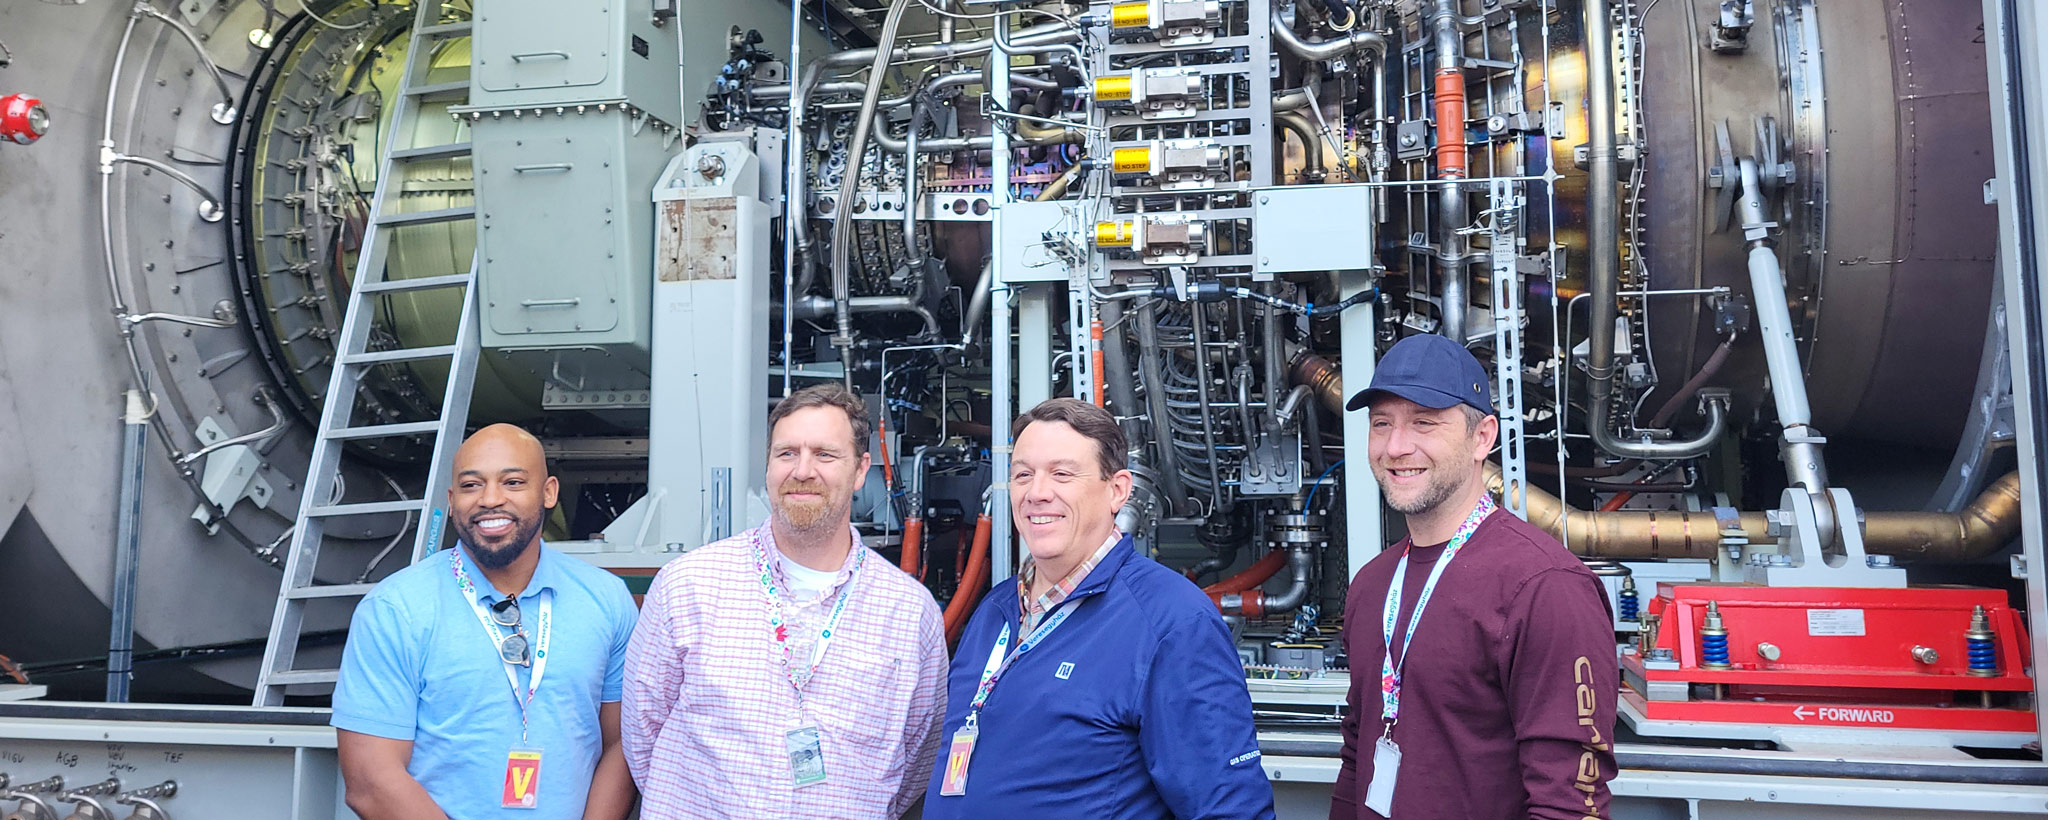 TVA team members stand next to a new aeroderivative gas turbine destined for a TVA site in New Johnsonville, Tennessee